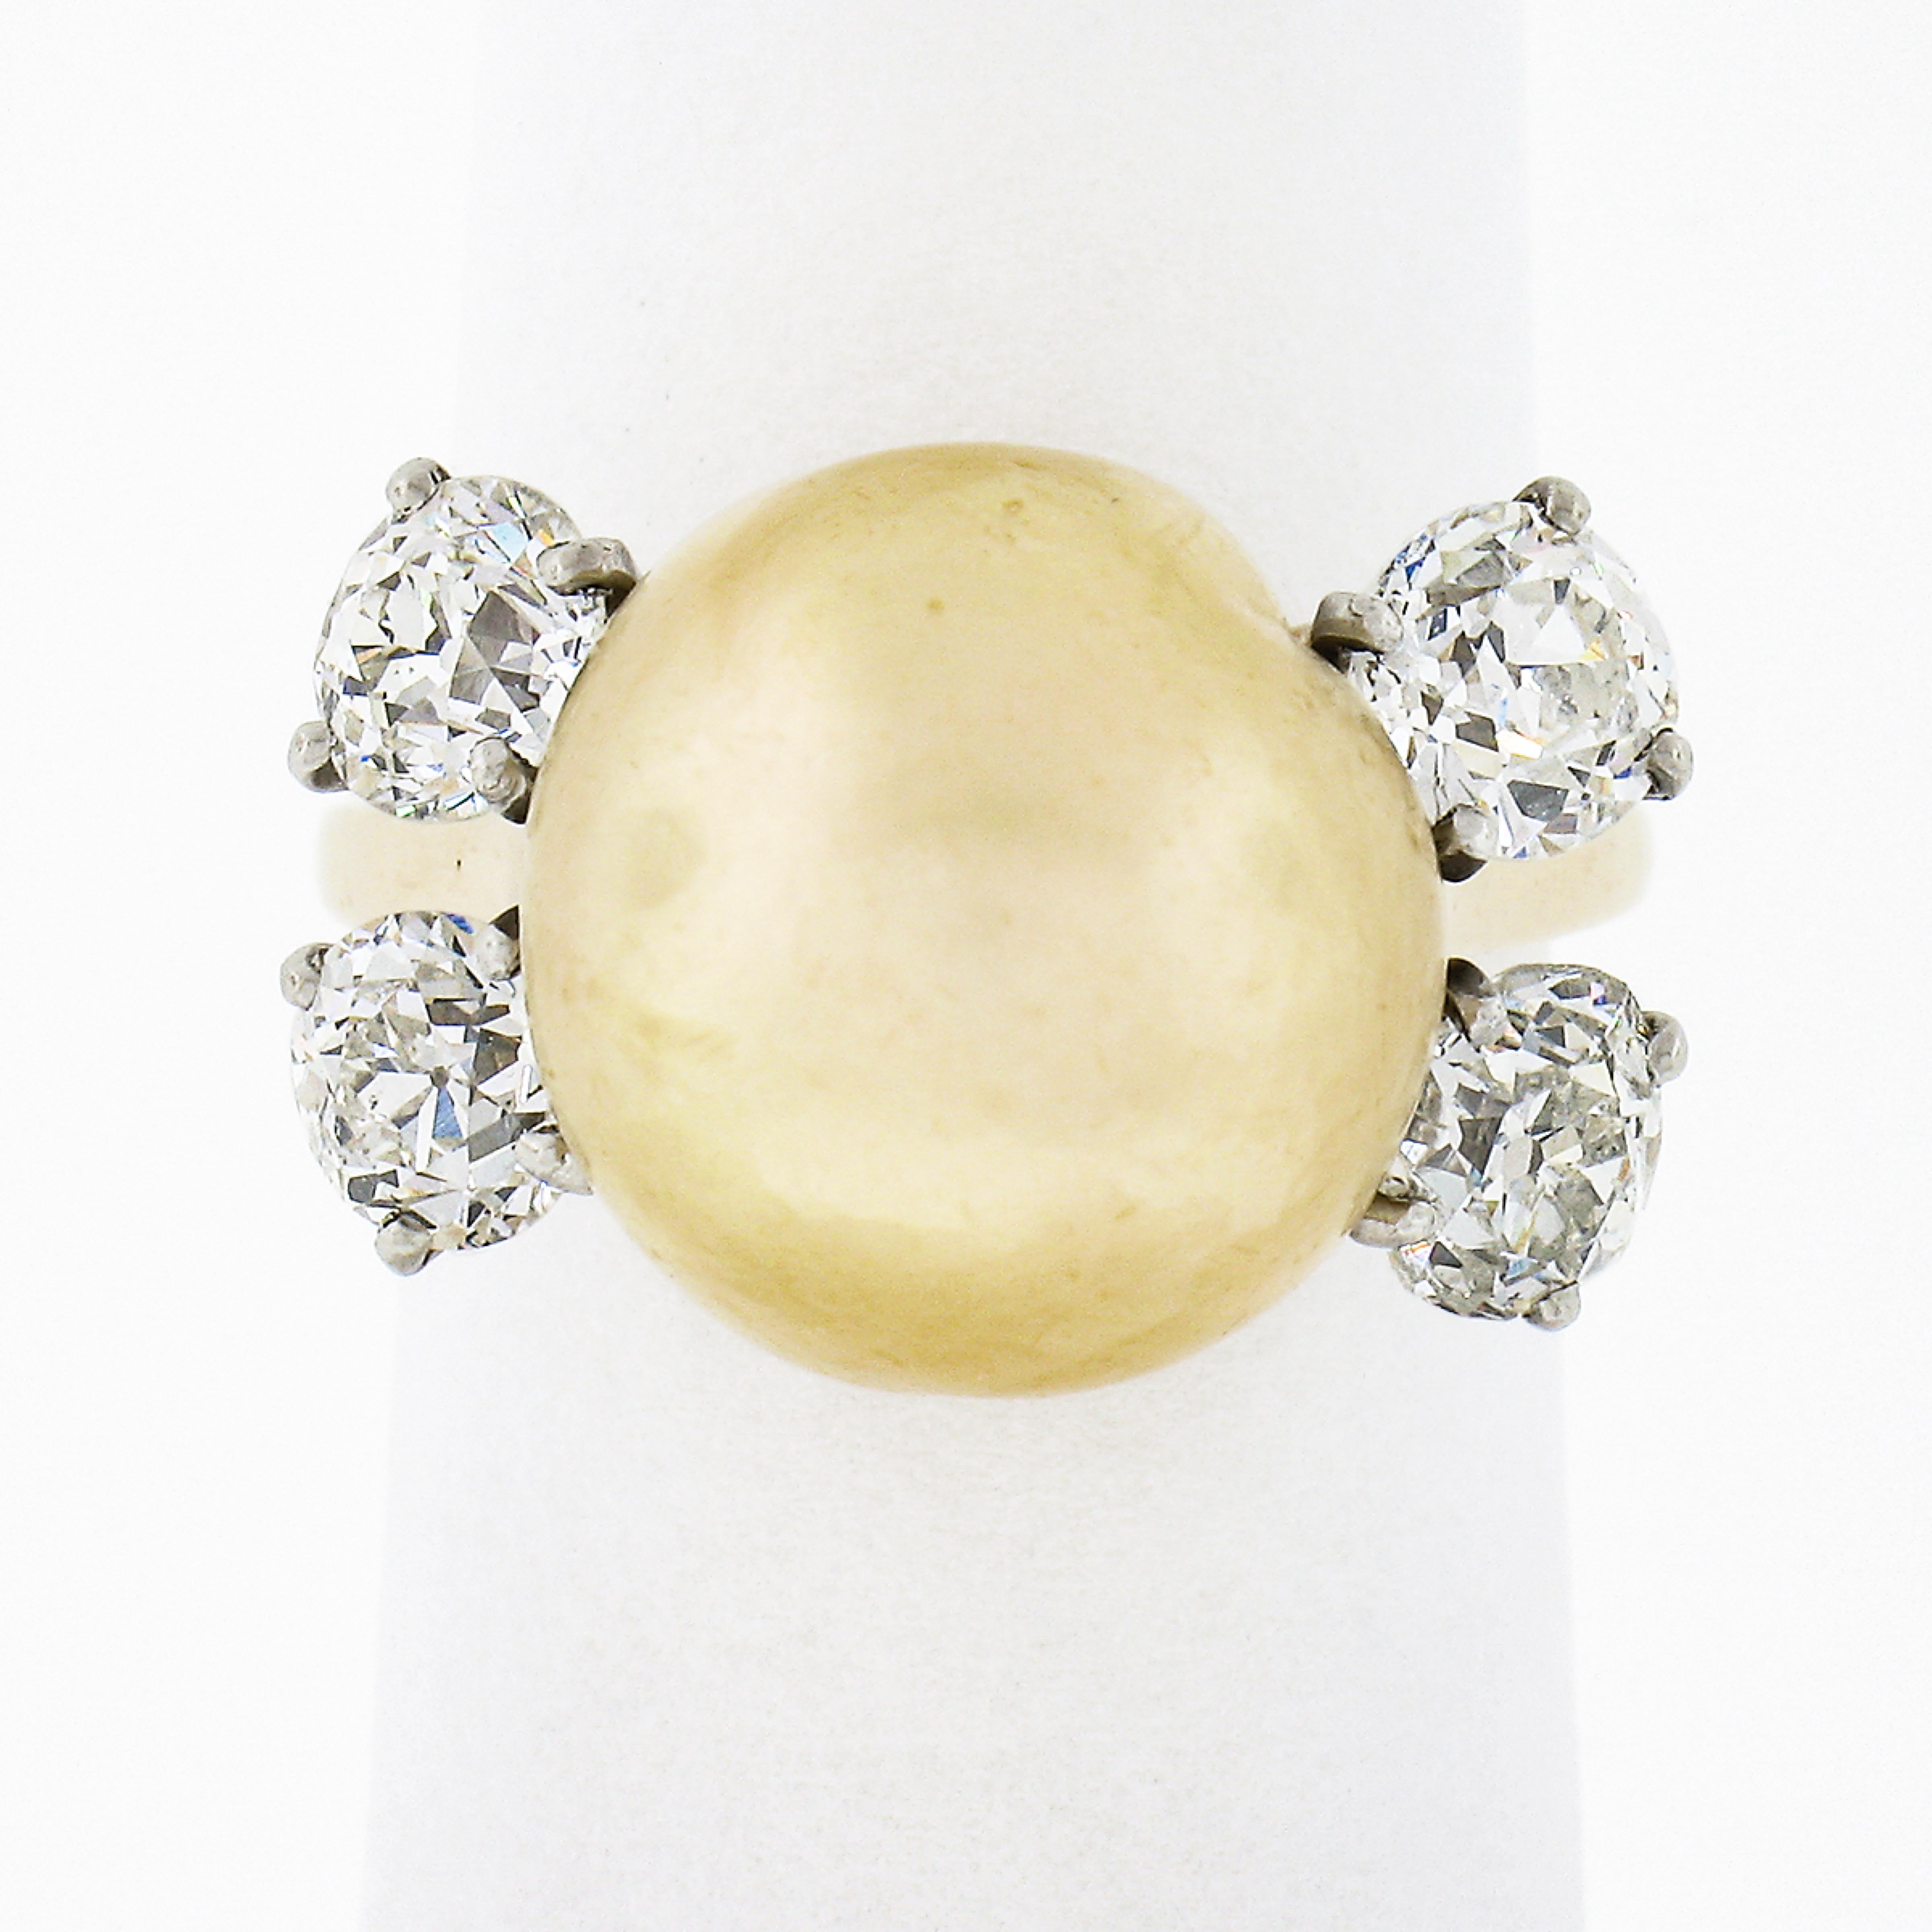 This lovely and elegant vintage ring was crafted from solid 14k yellow gold with solid 14k white gold diamond baskets. This ring features a genuine cultured South Sea pearl that has been certified by GIA. The pearl displays a gorgeous golden yellow